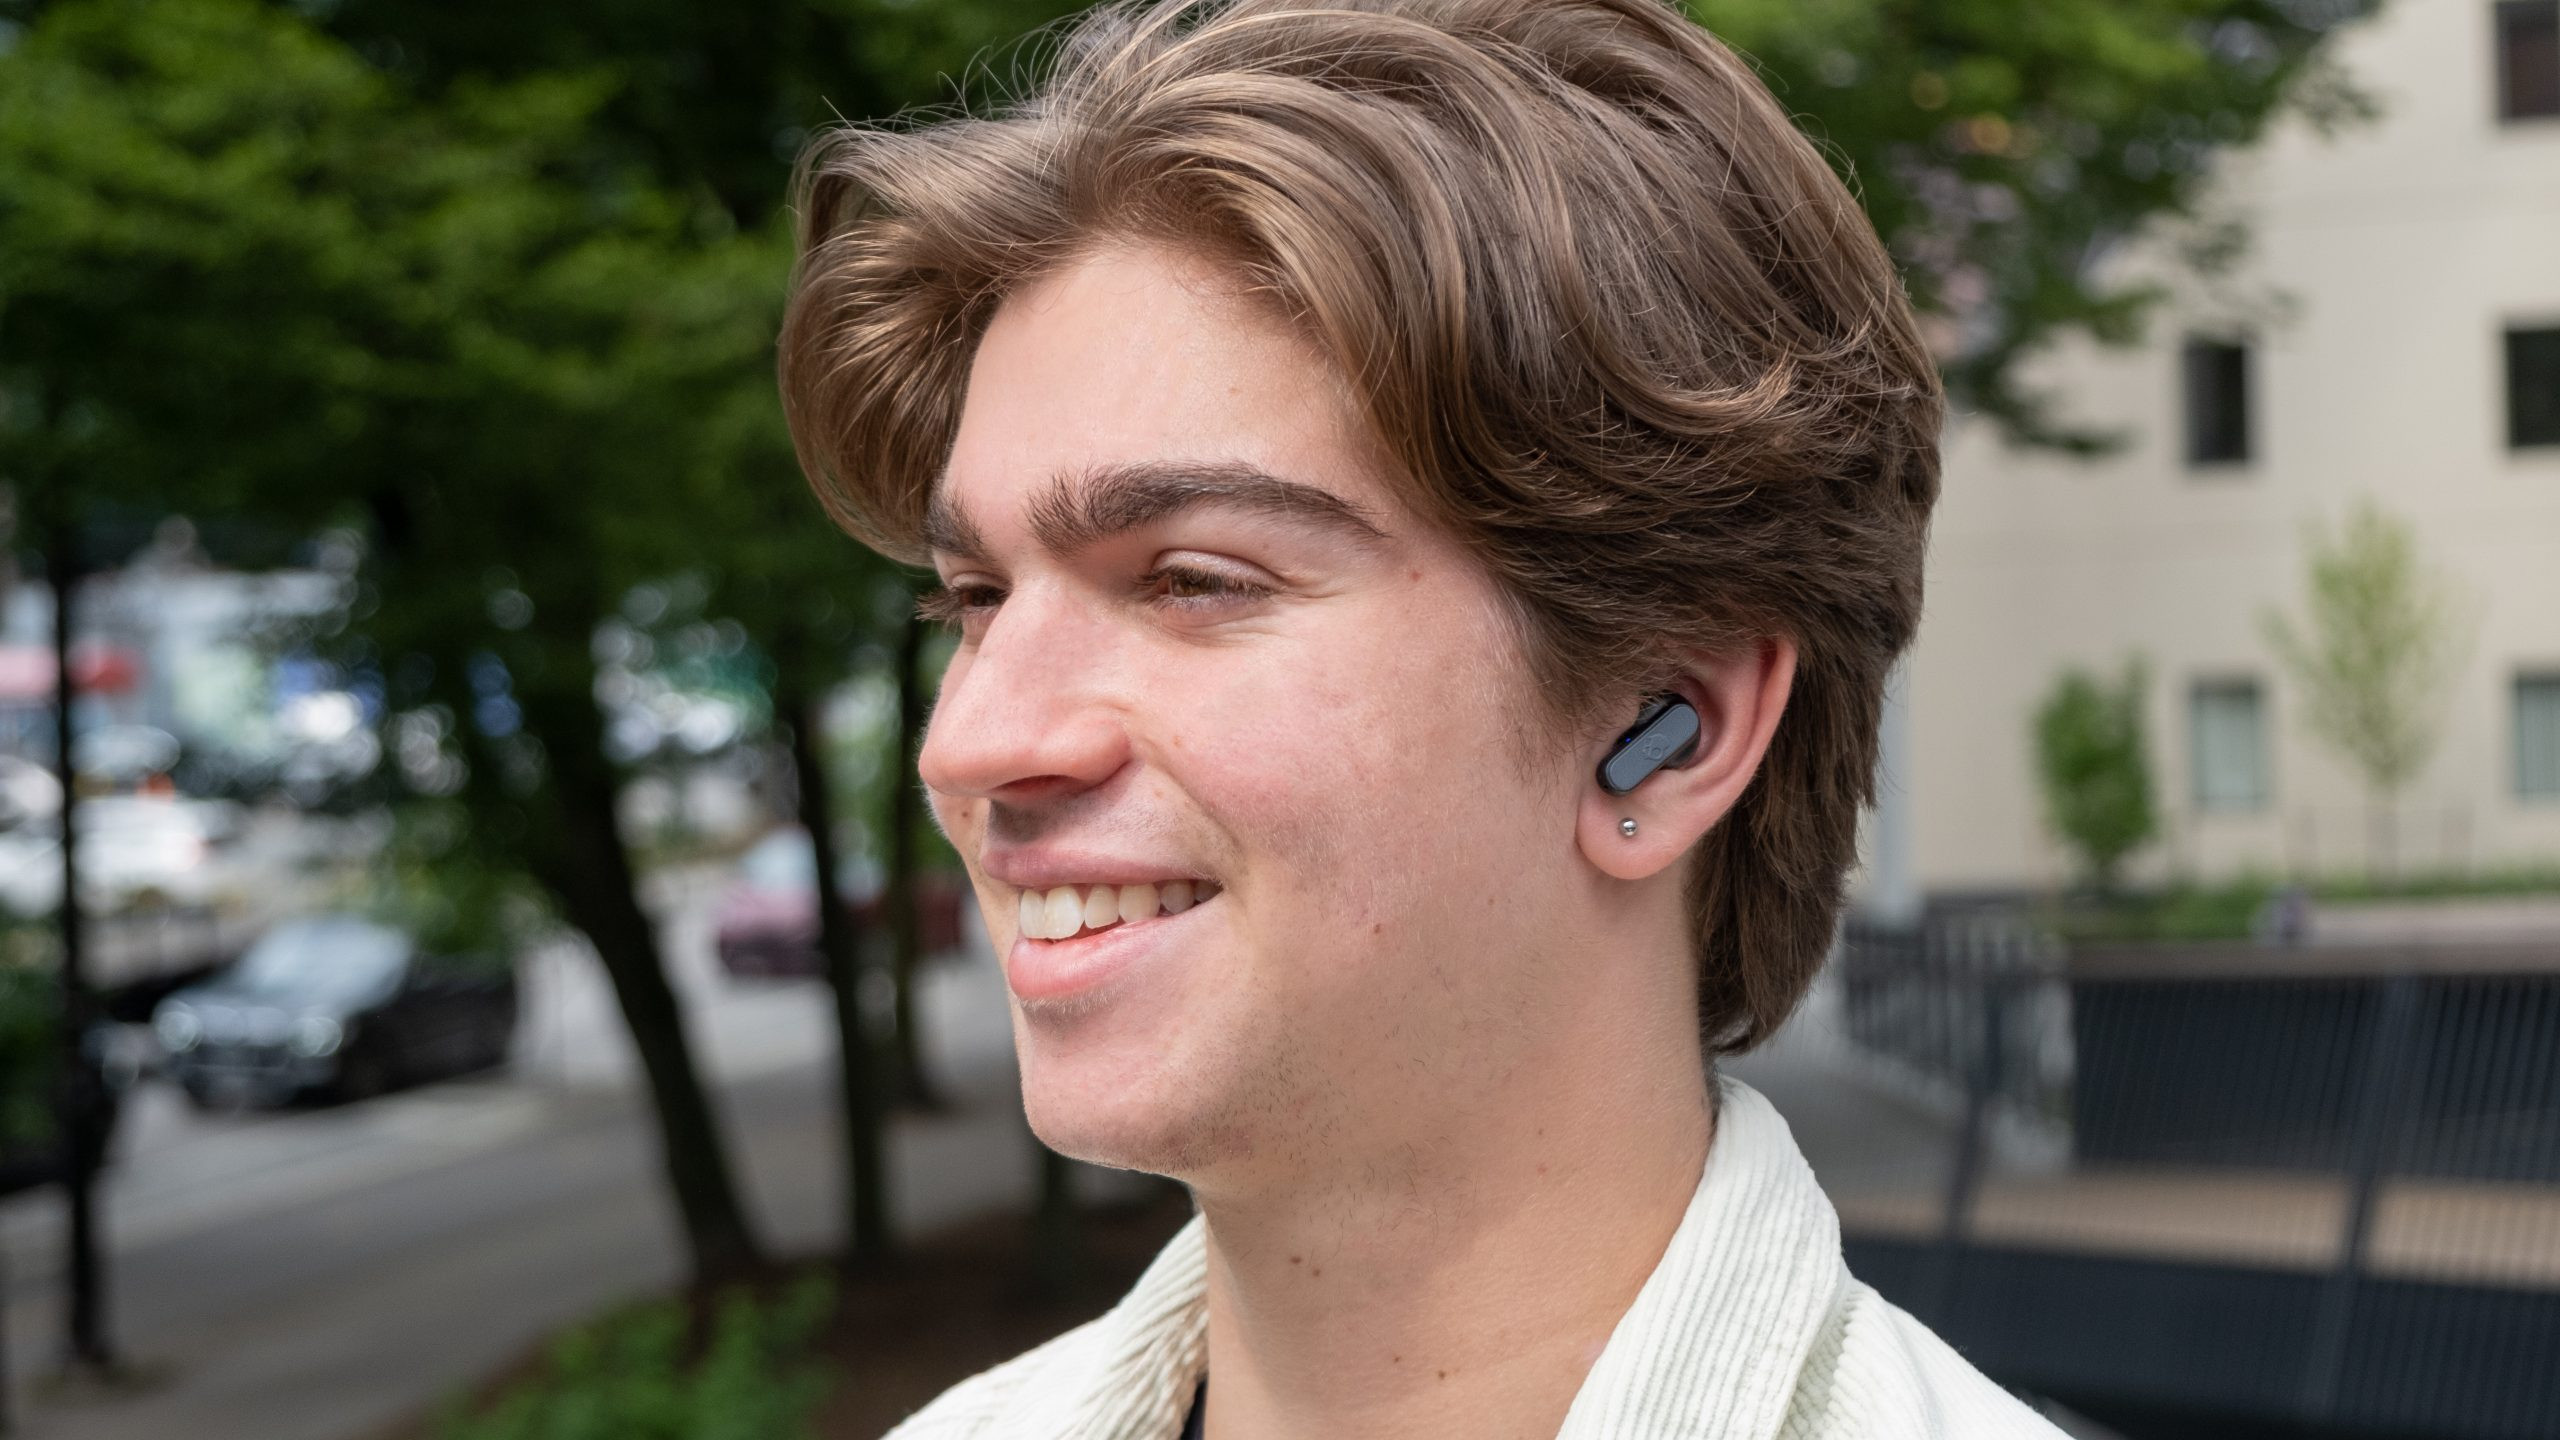 A man faces left smiling while wearing the Skullcandy Dime 2 with trees and a street in the background.